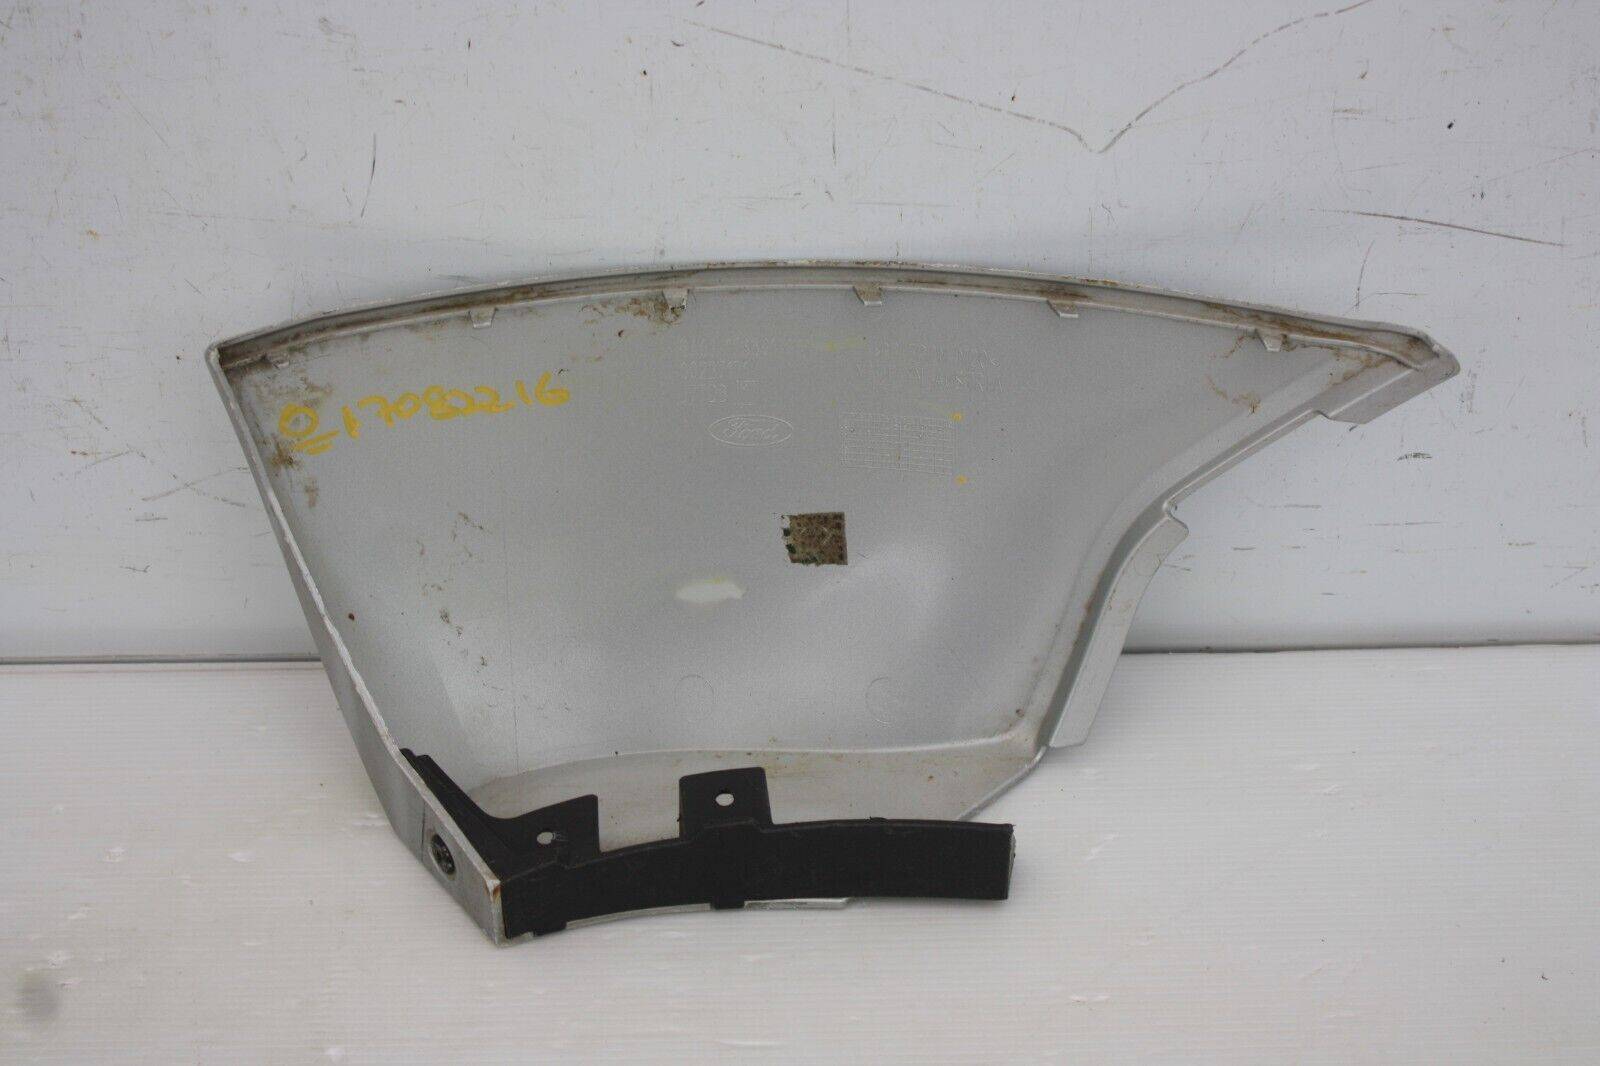 Ford-Fiesta-Rear-Bumper-Right-Side-Trim-Cover-2008-to-2012-8A6J-17B891-AAW-175883634834-8